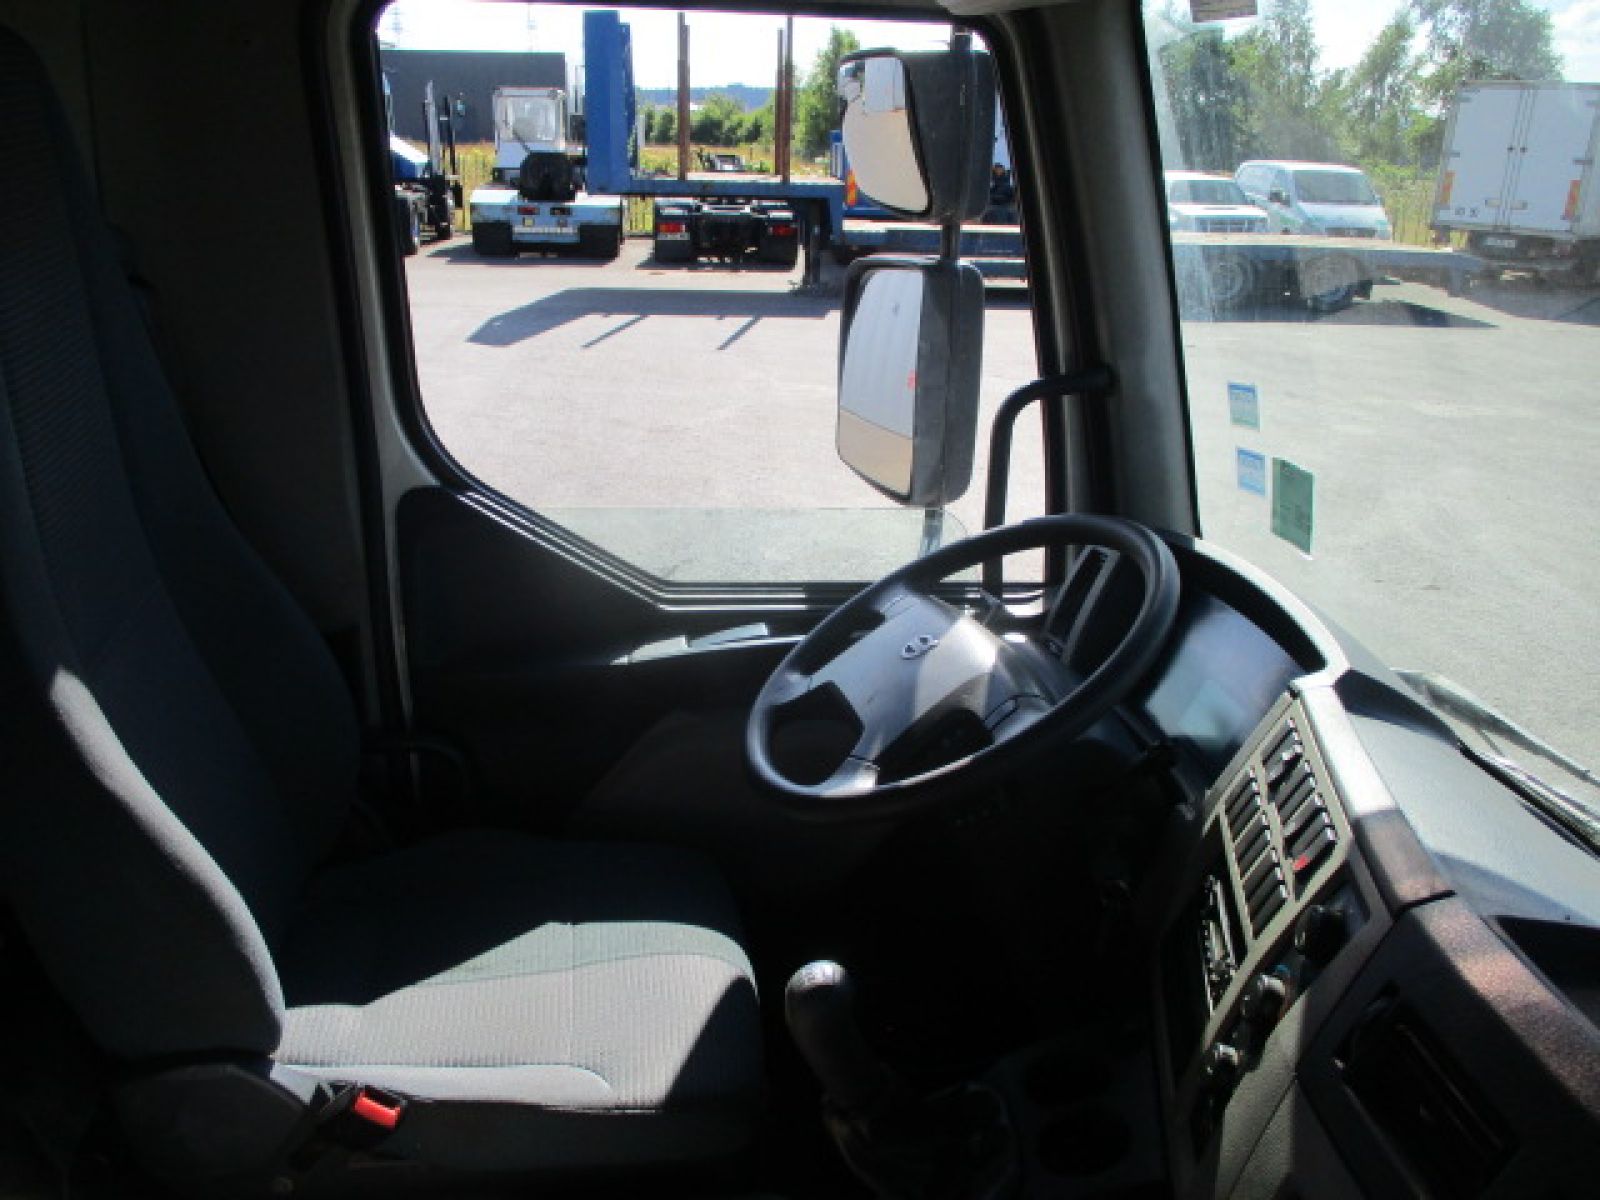 Second hand sale Truck units - VOLVO FL 240  FOURGON (Belgique - Europe) - Houffalize Trading s.a.